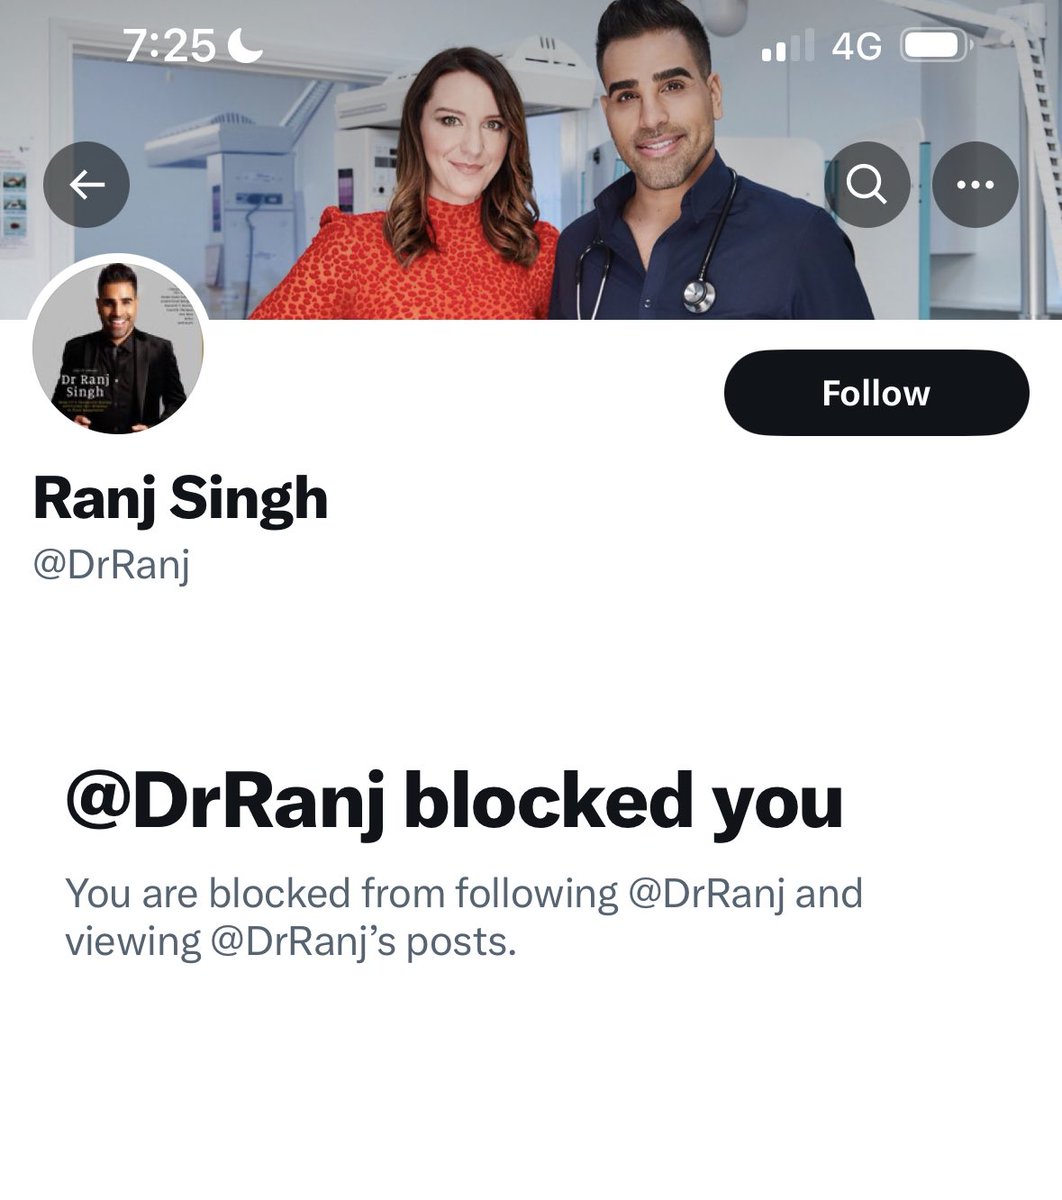 You know the wrongun TV fake doctors are shitting themselves, they know what’s coming when they block you before you even say a word to them….! 

Dr Ranj
Dr Hilary
Lorraine
GMB
Holly Willoughby
Phillip Schofield 

All part of the same club……

Watch the revelations unfold!